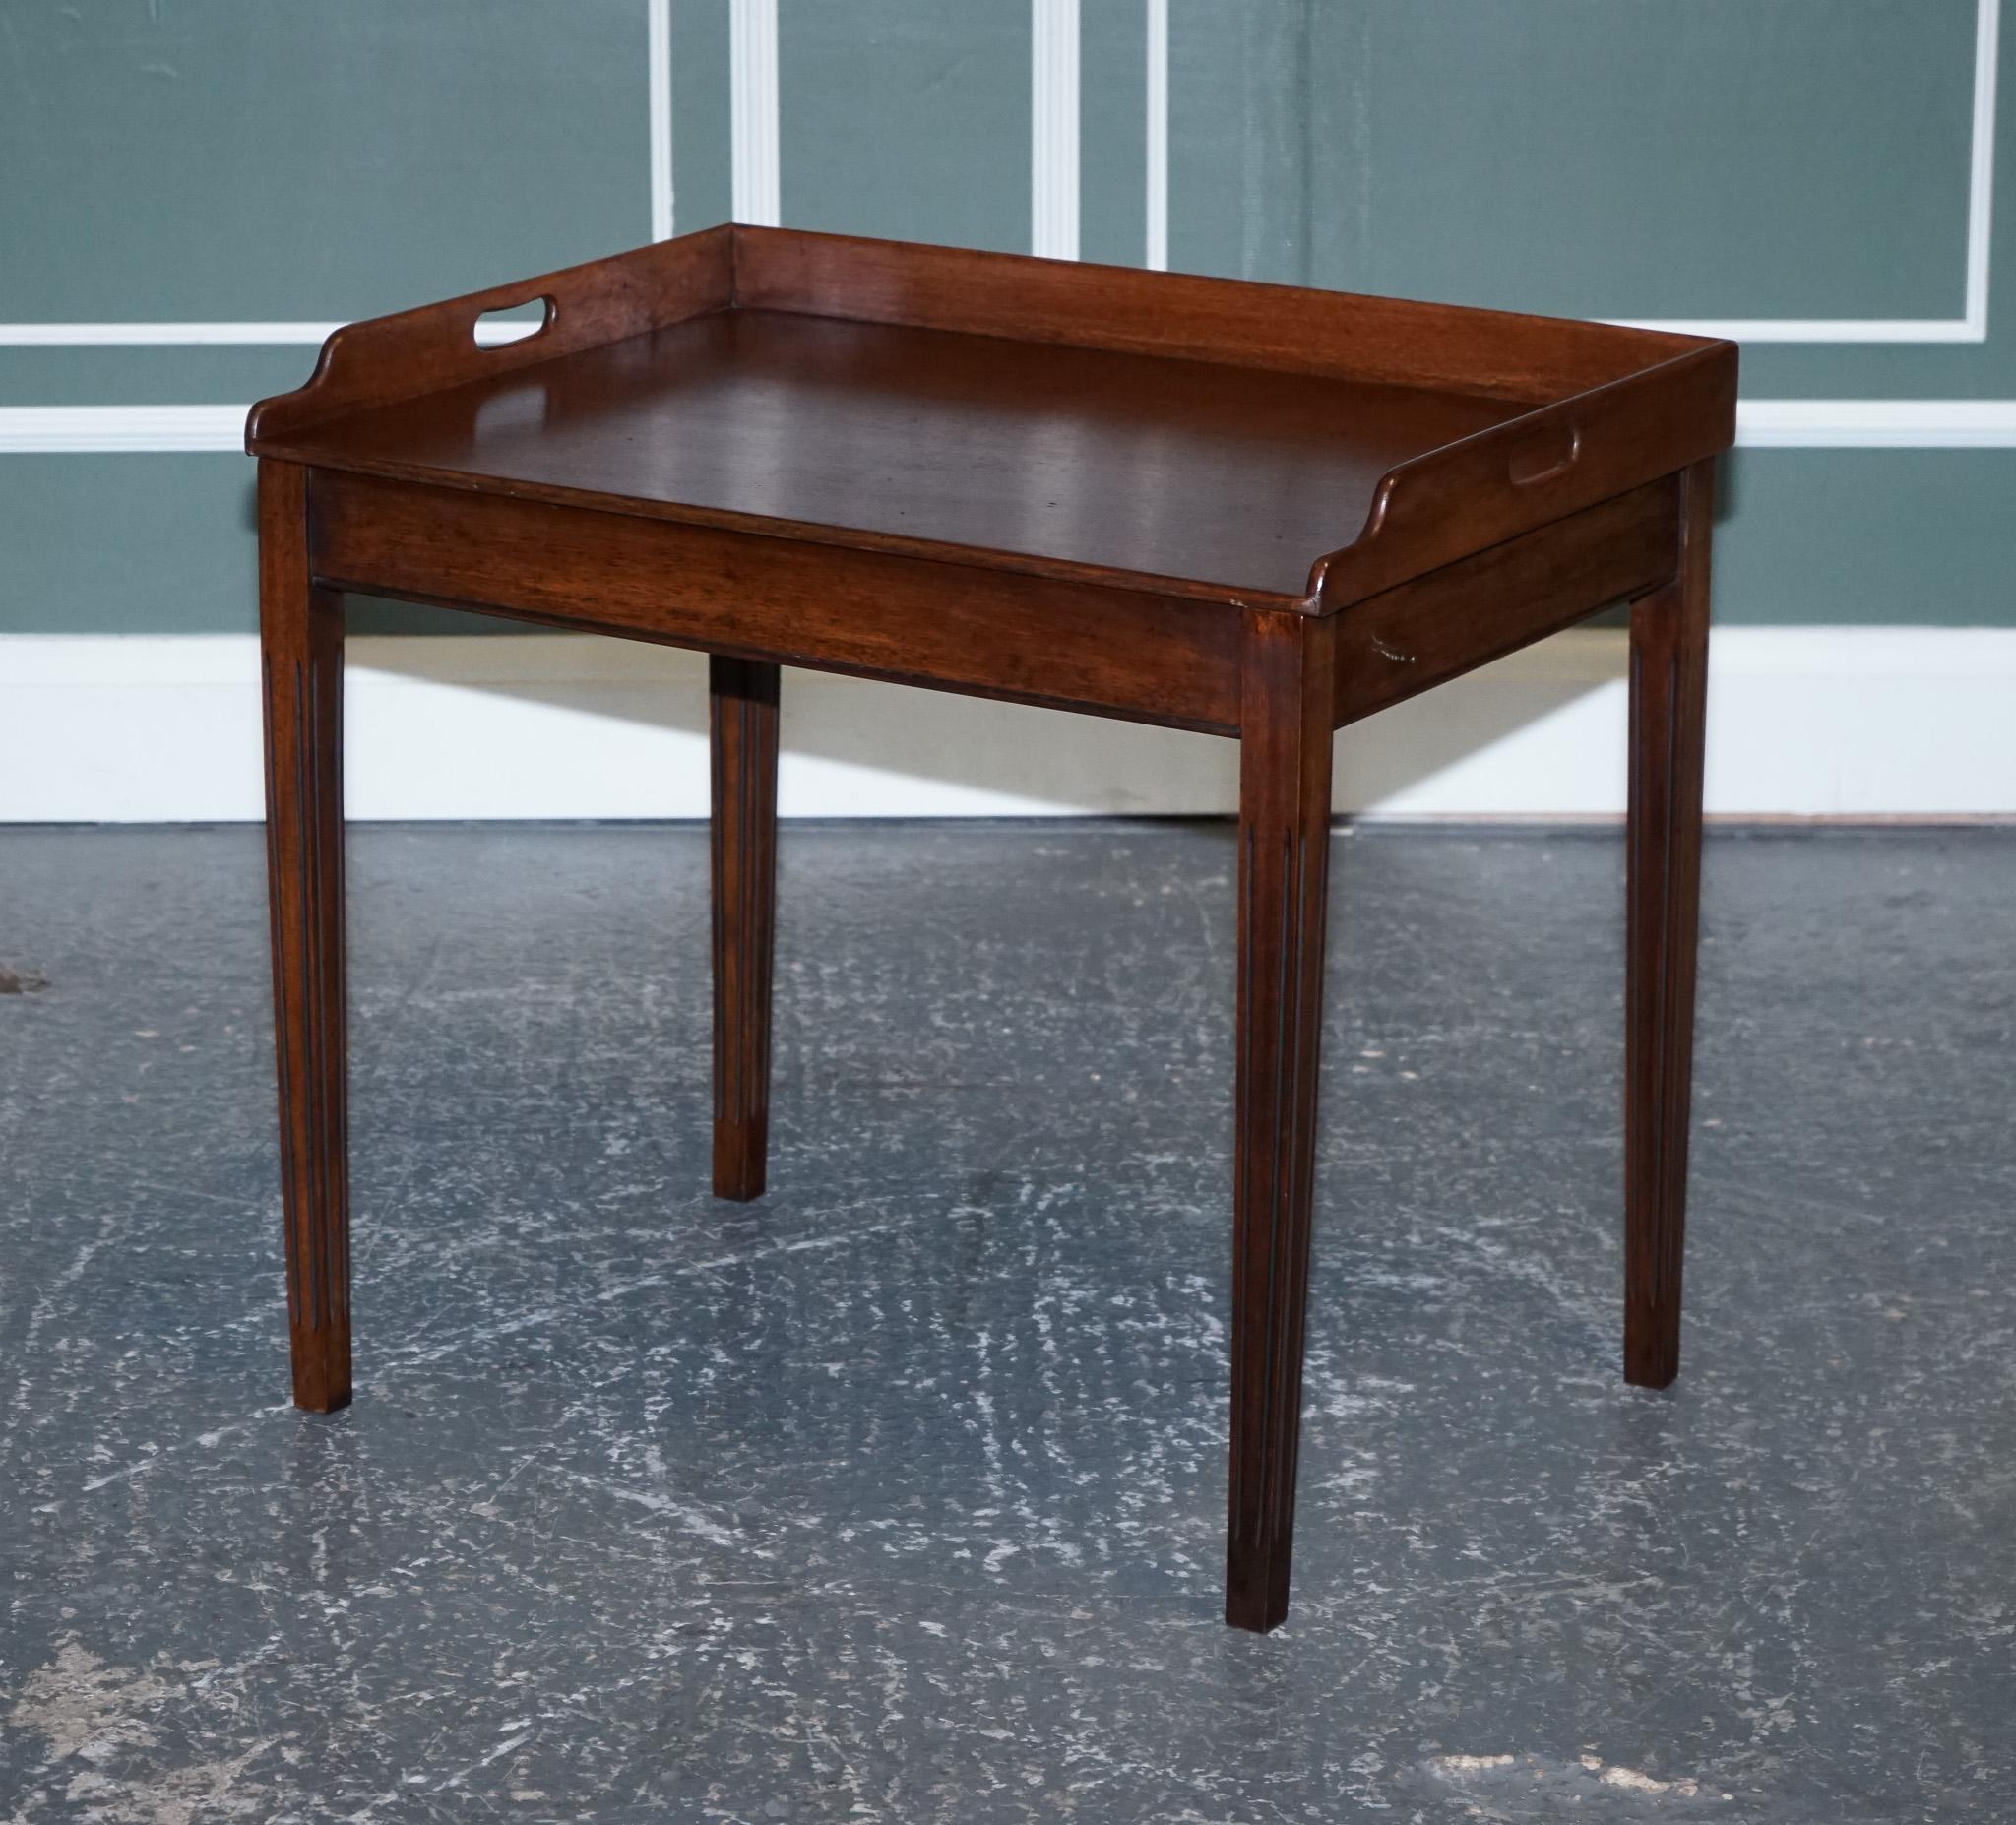 British Antique Butlers Serving Tray on Stand Hardwood Victorian, 19th Century For Sale